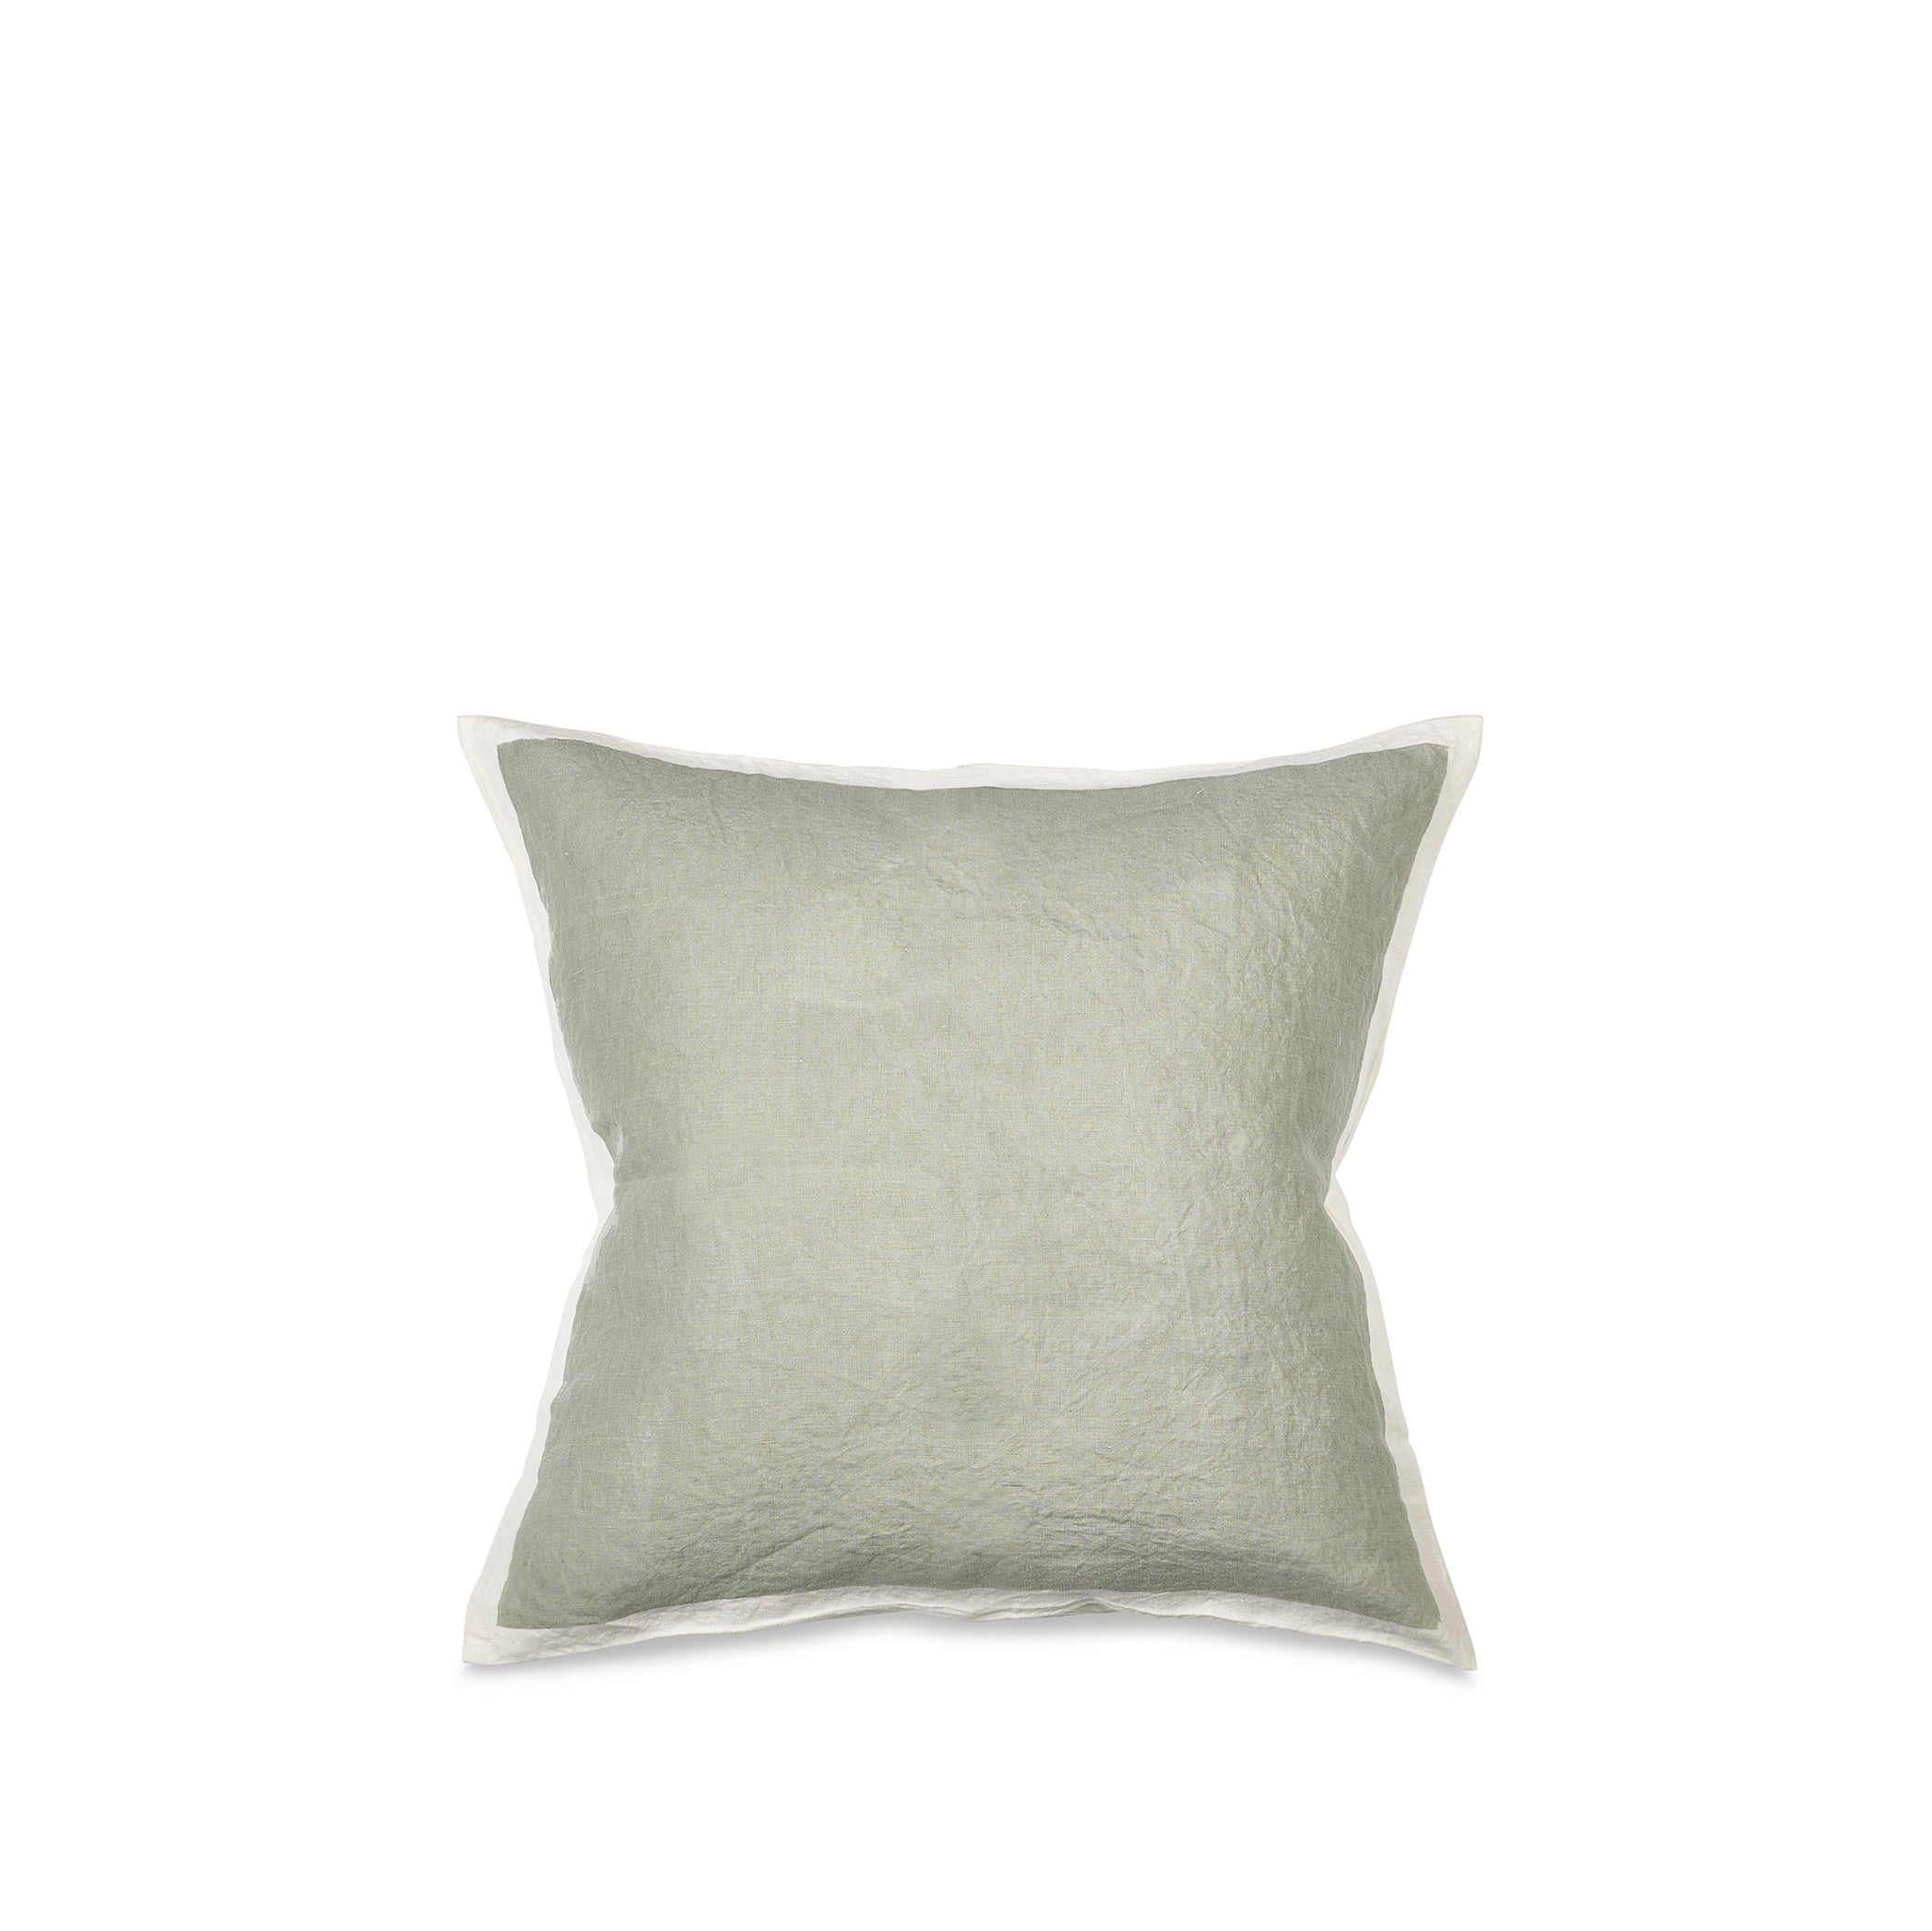 Hand Painted Linen Cushion in Pale Green, 50cm x 50cm